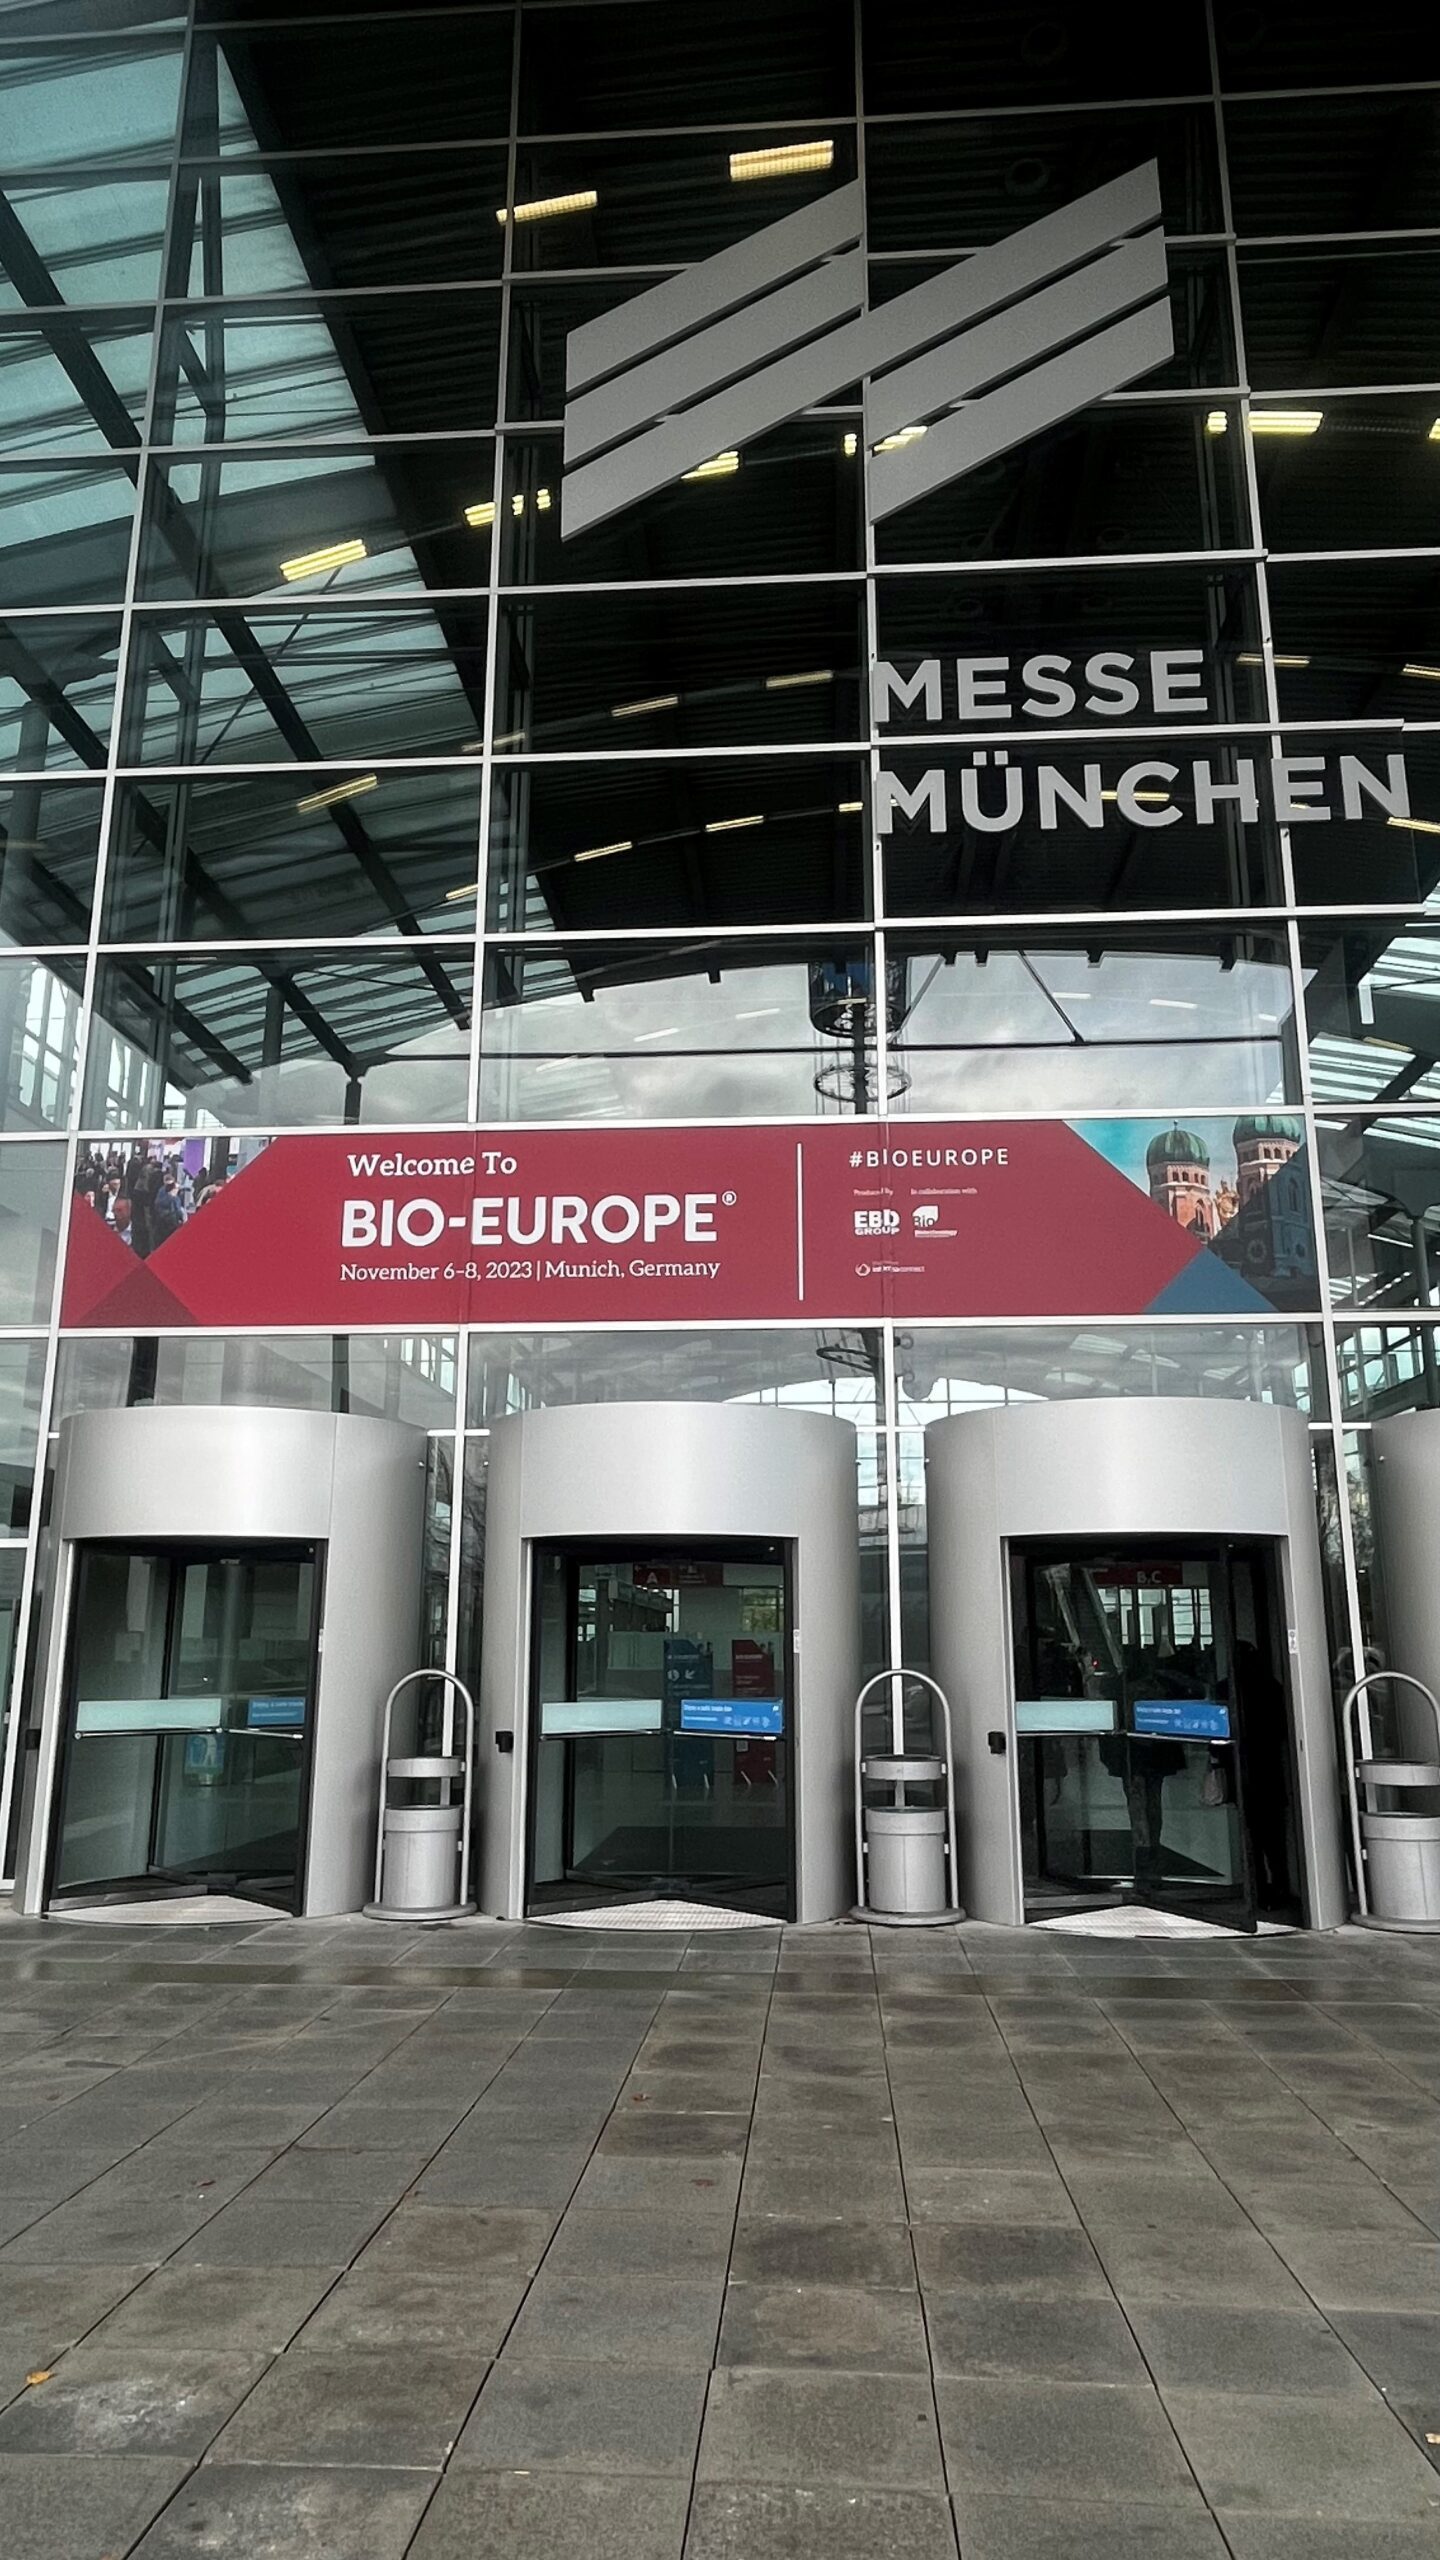 AccelBio participates in BioEurope, showcasing innovations and cultivating collaborations